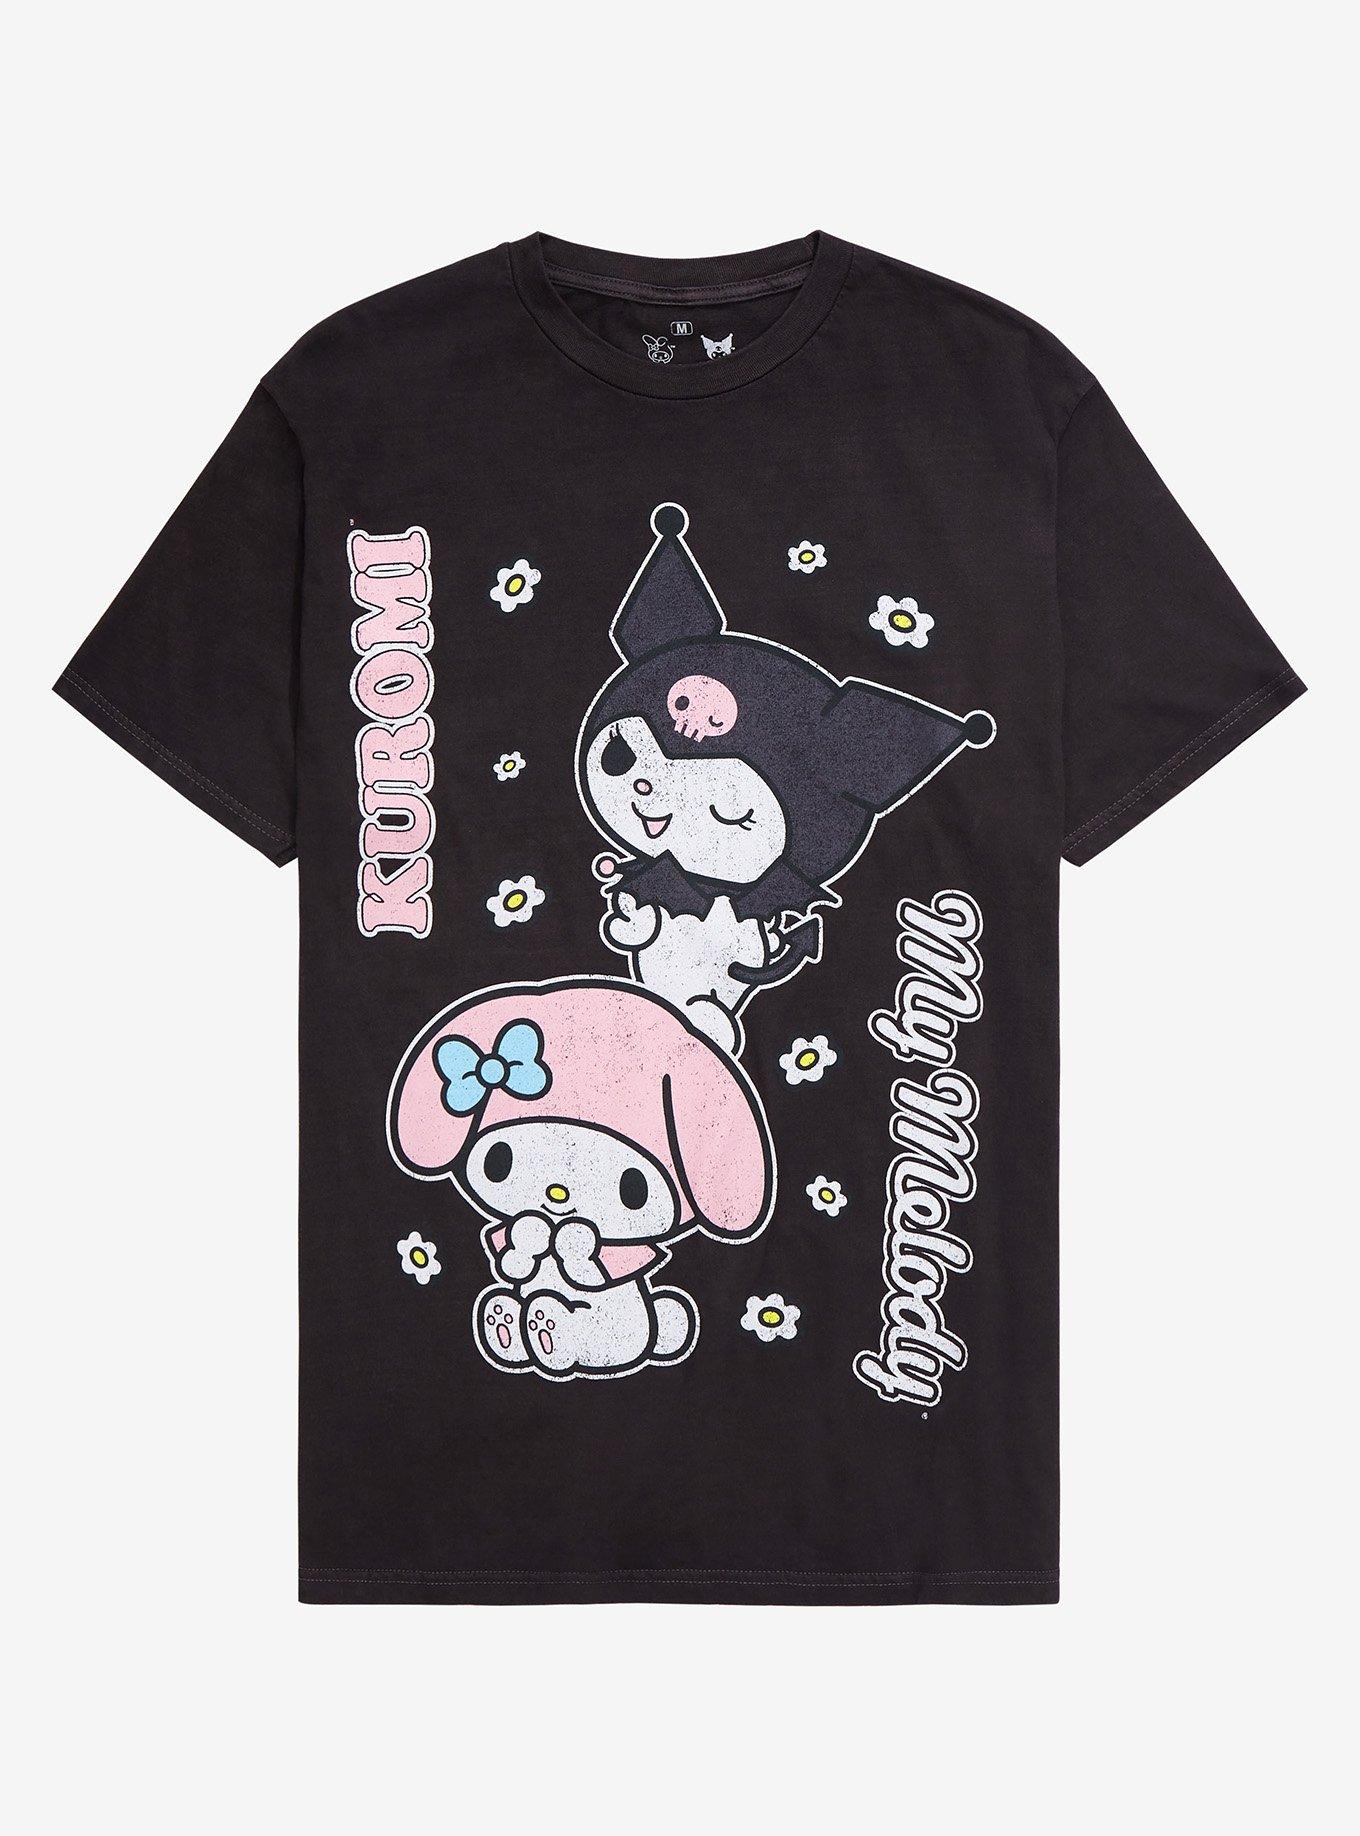 Sanrio Kuromi & My Melody Floral T-Shirt - BoxLunch Exclusive, BLACK, hi-res